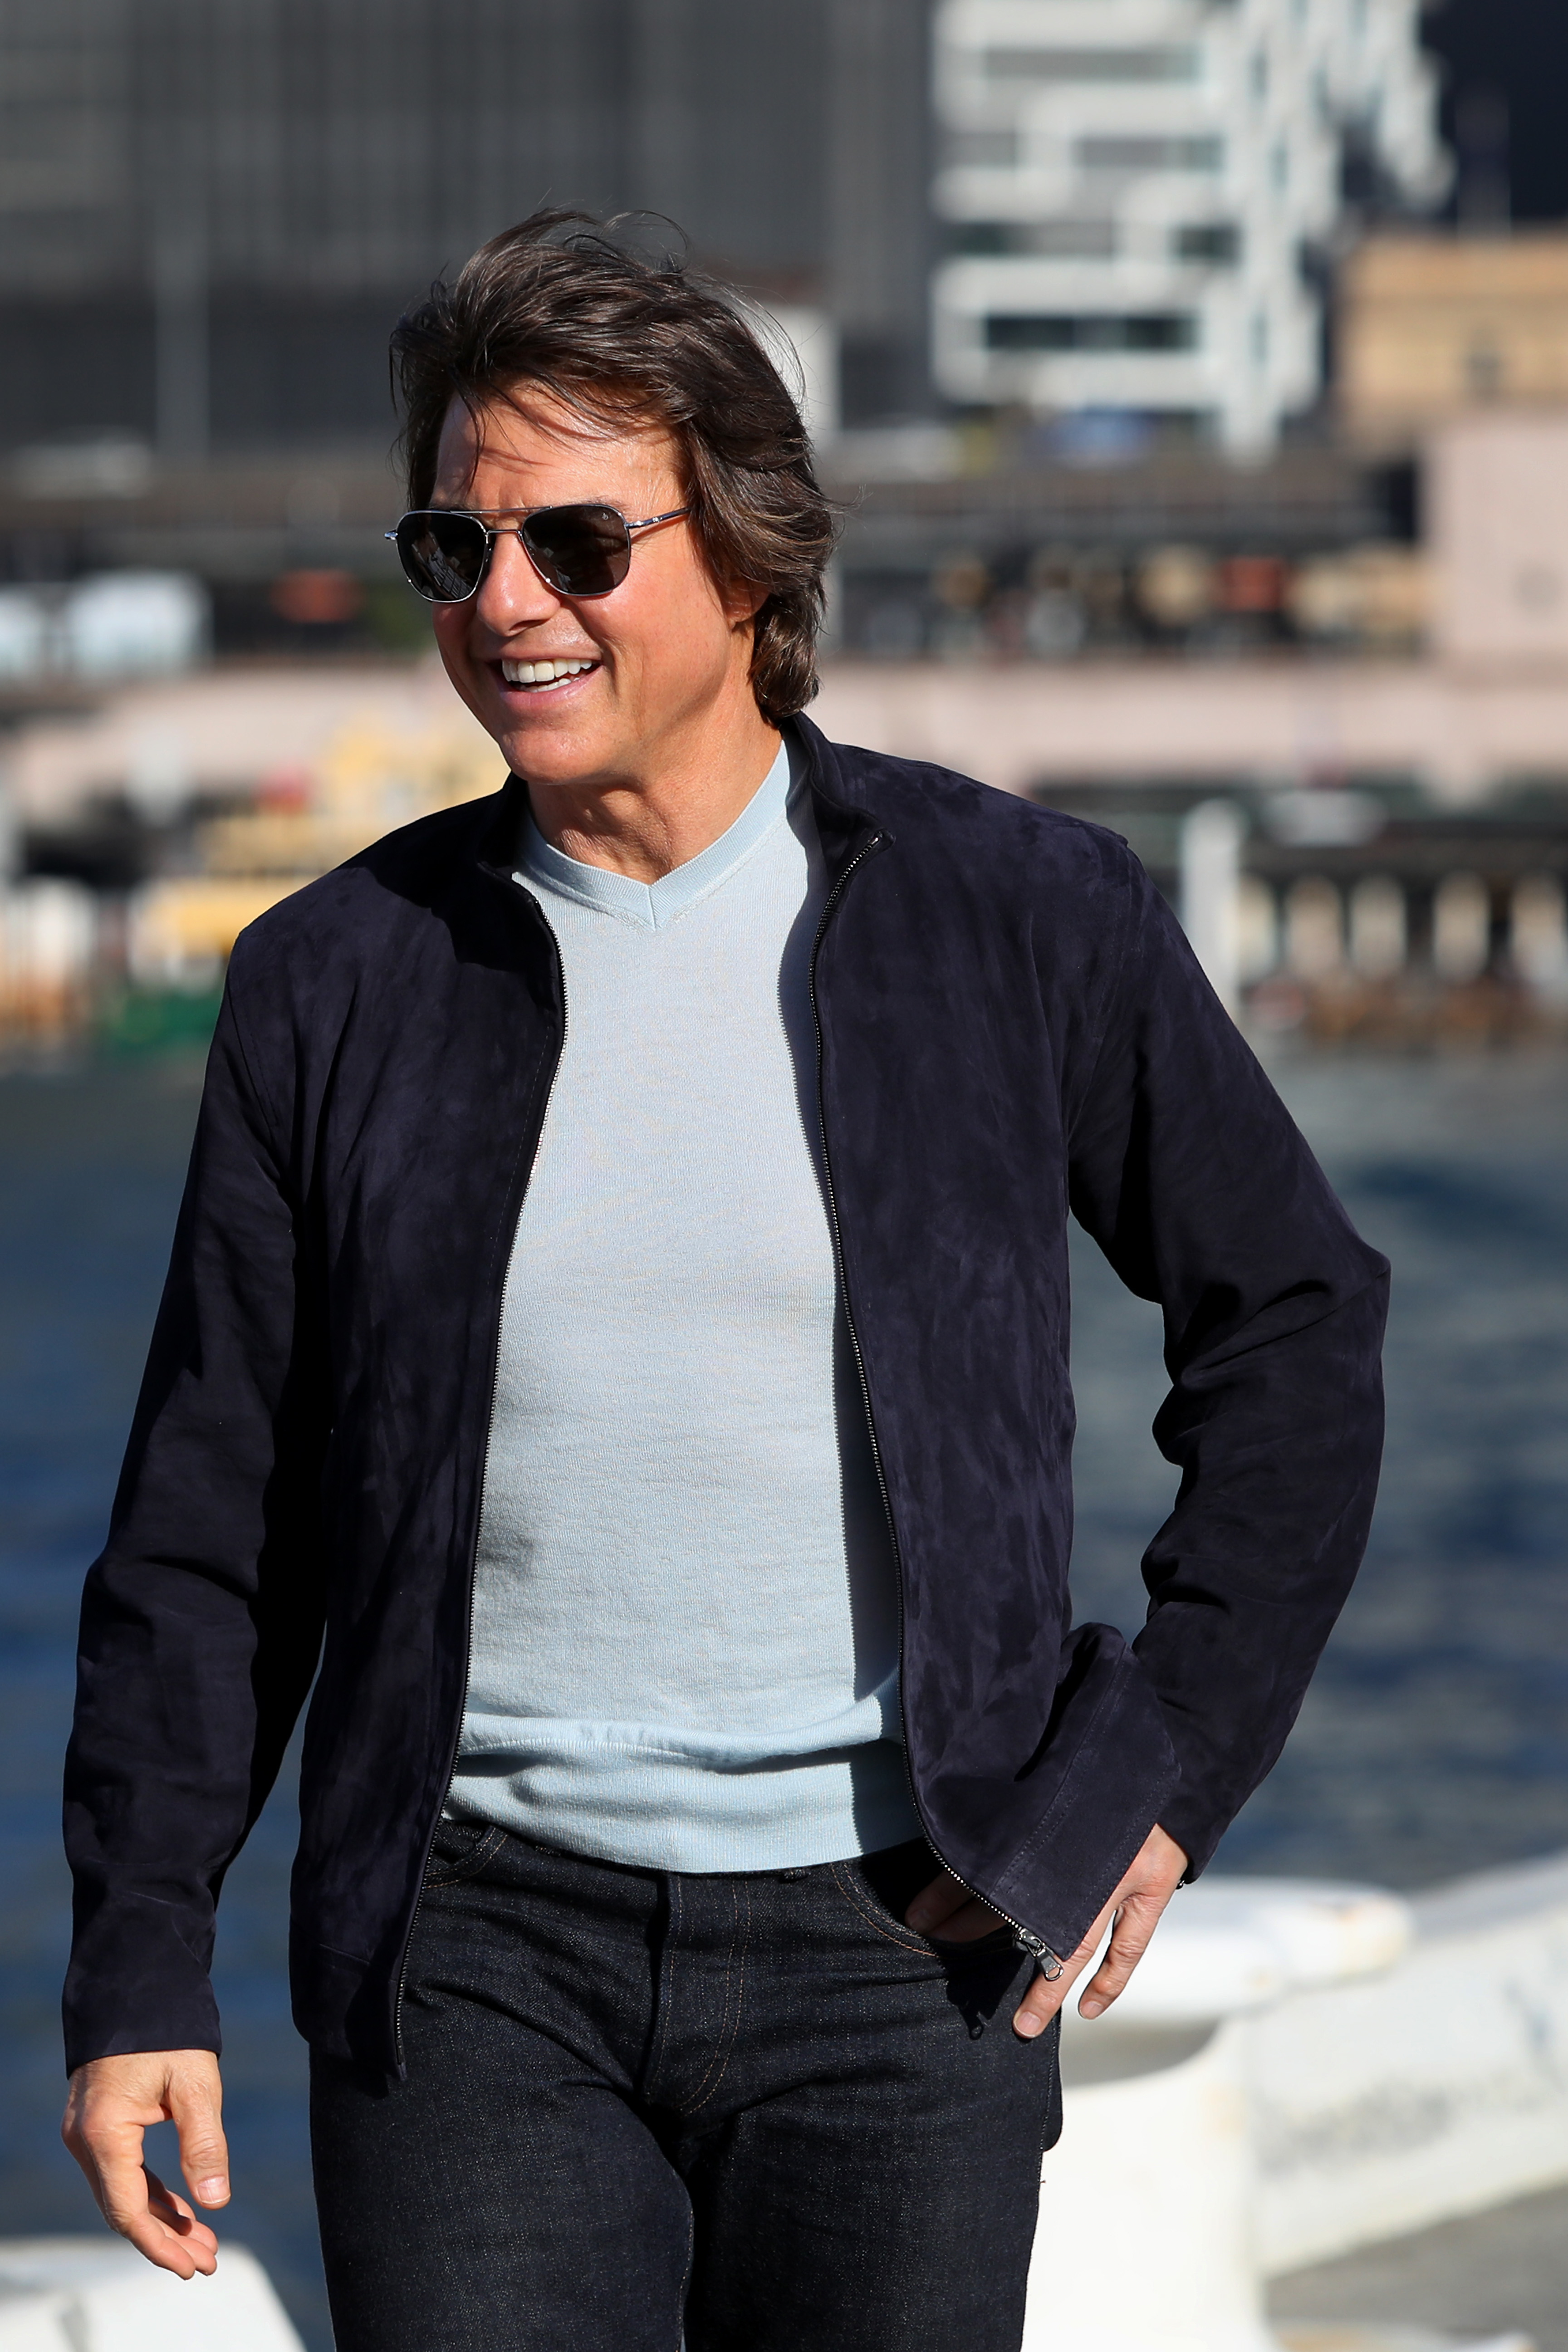 Close-up of Tom smiling and wearing sunglasses, a jacket, a T-shirt, and jeans